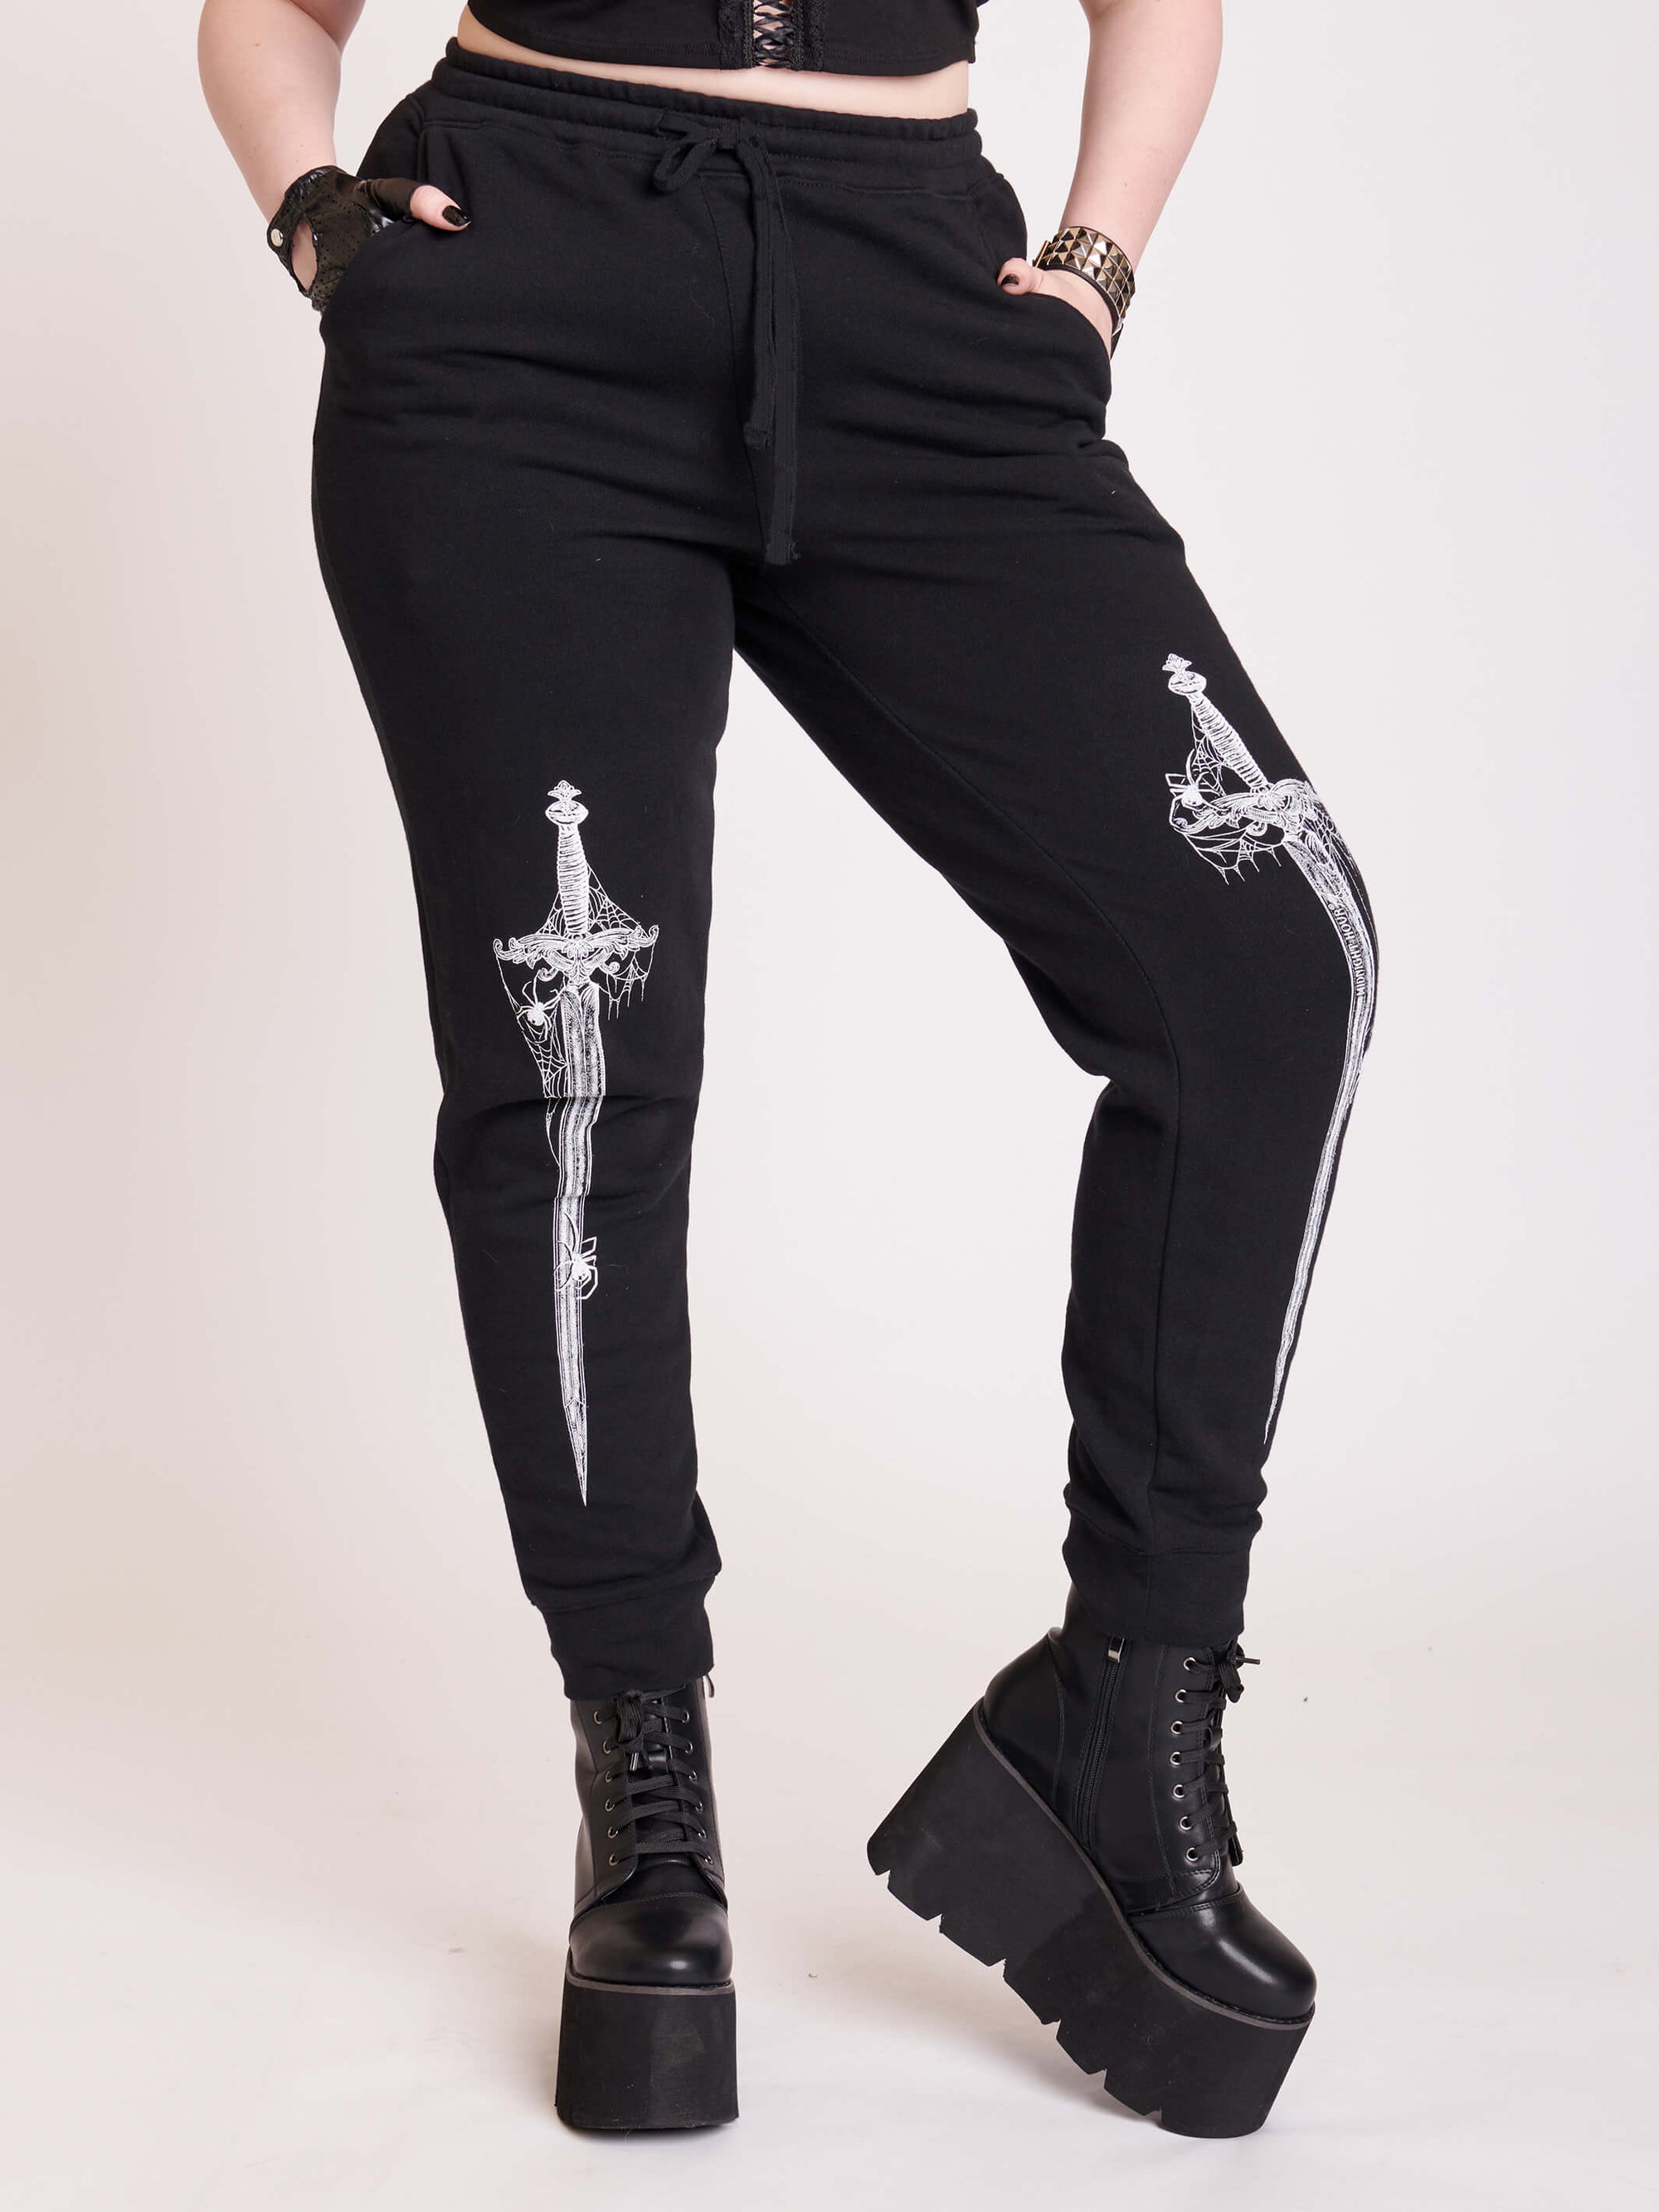 Womb Straps Midwestern Goth Pant